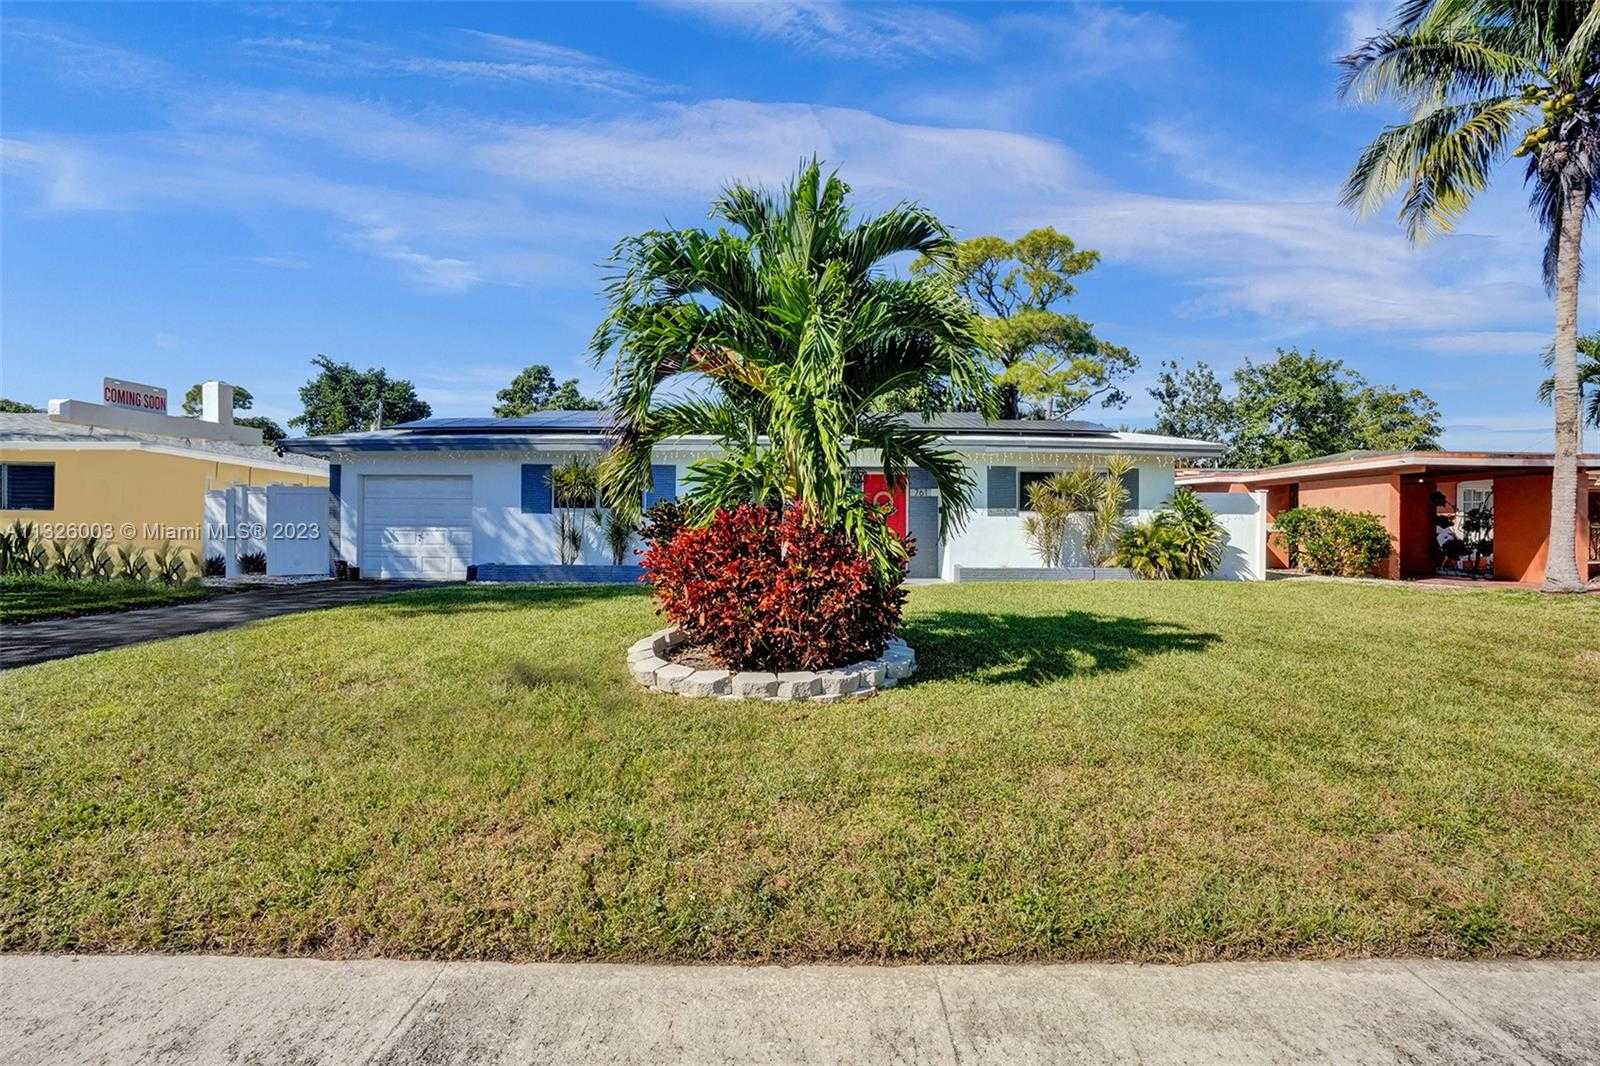 House in Fort Lauderdale, Florida 11622001